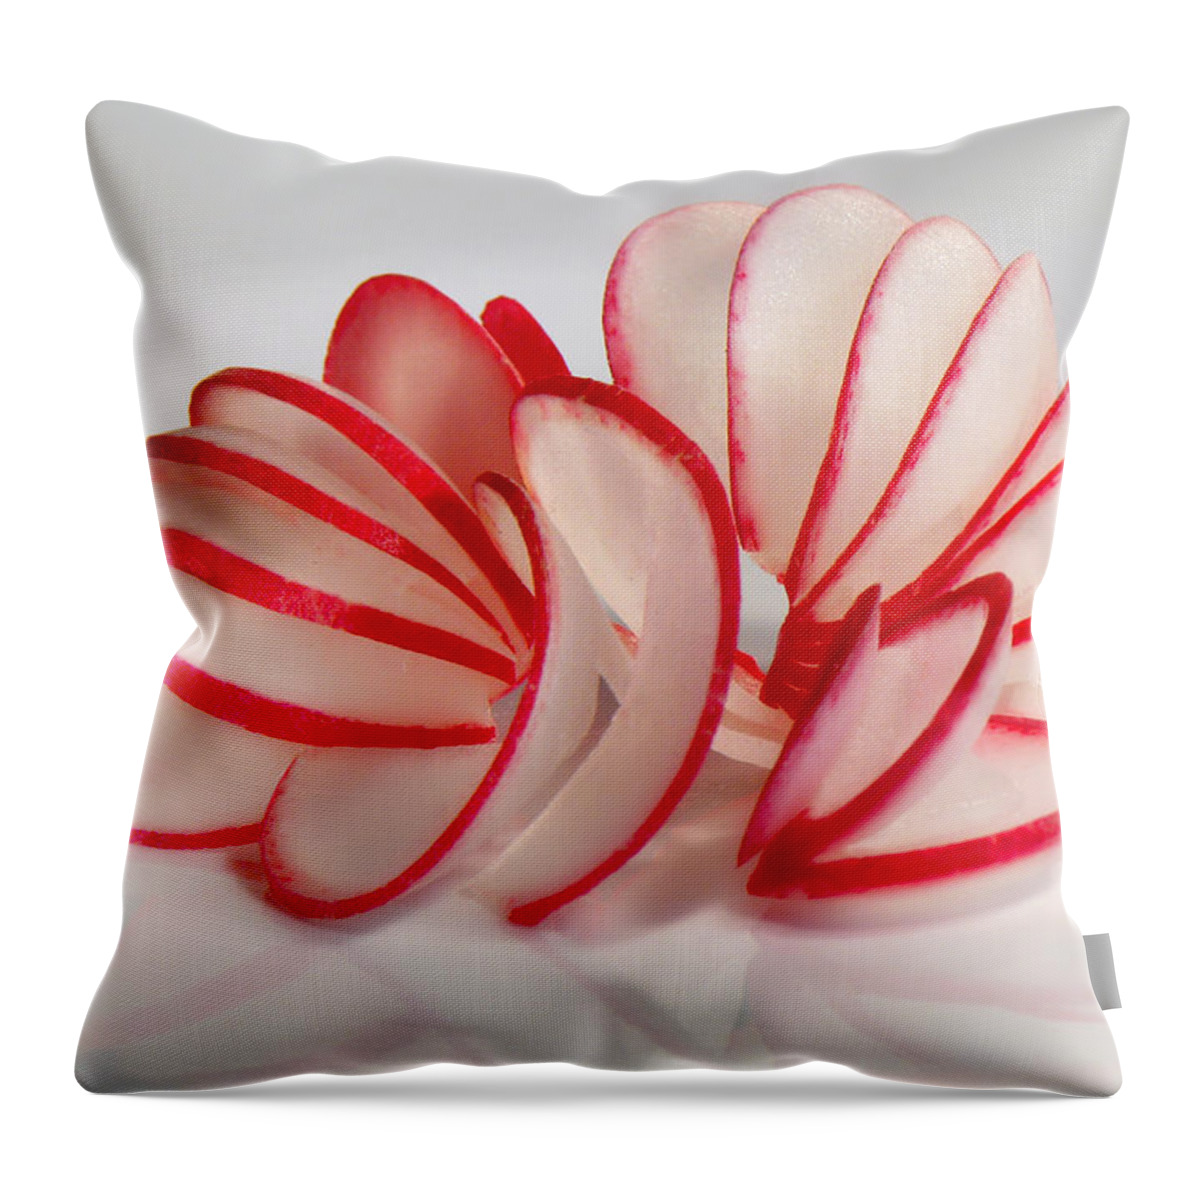  Throw Pillow featuring the photograph Curls by John Poon